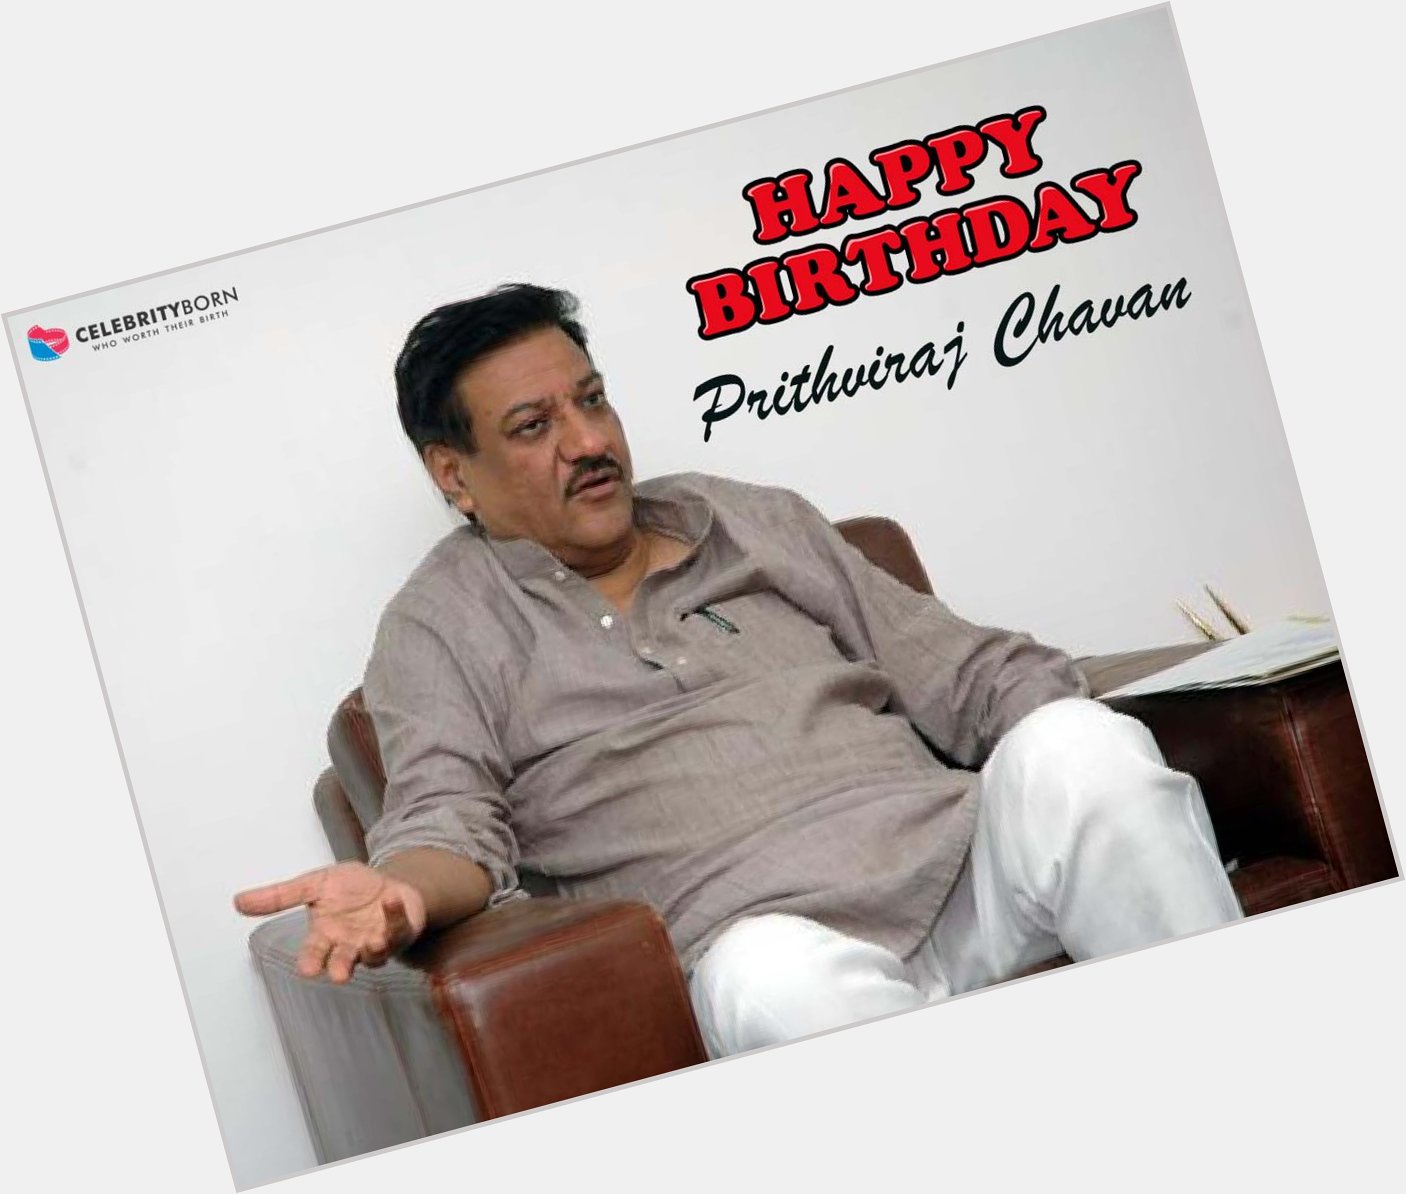 Wishing a very happy birthday to Prithviraj Chavan Sir. He is a real motivator for new generation. 